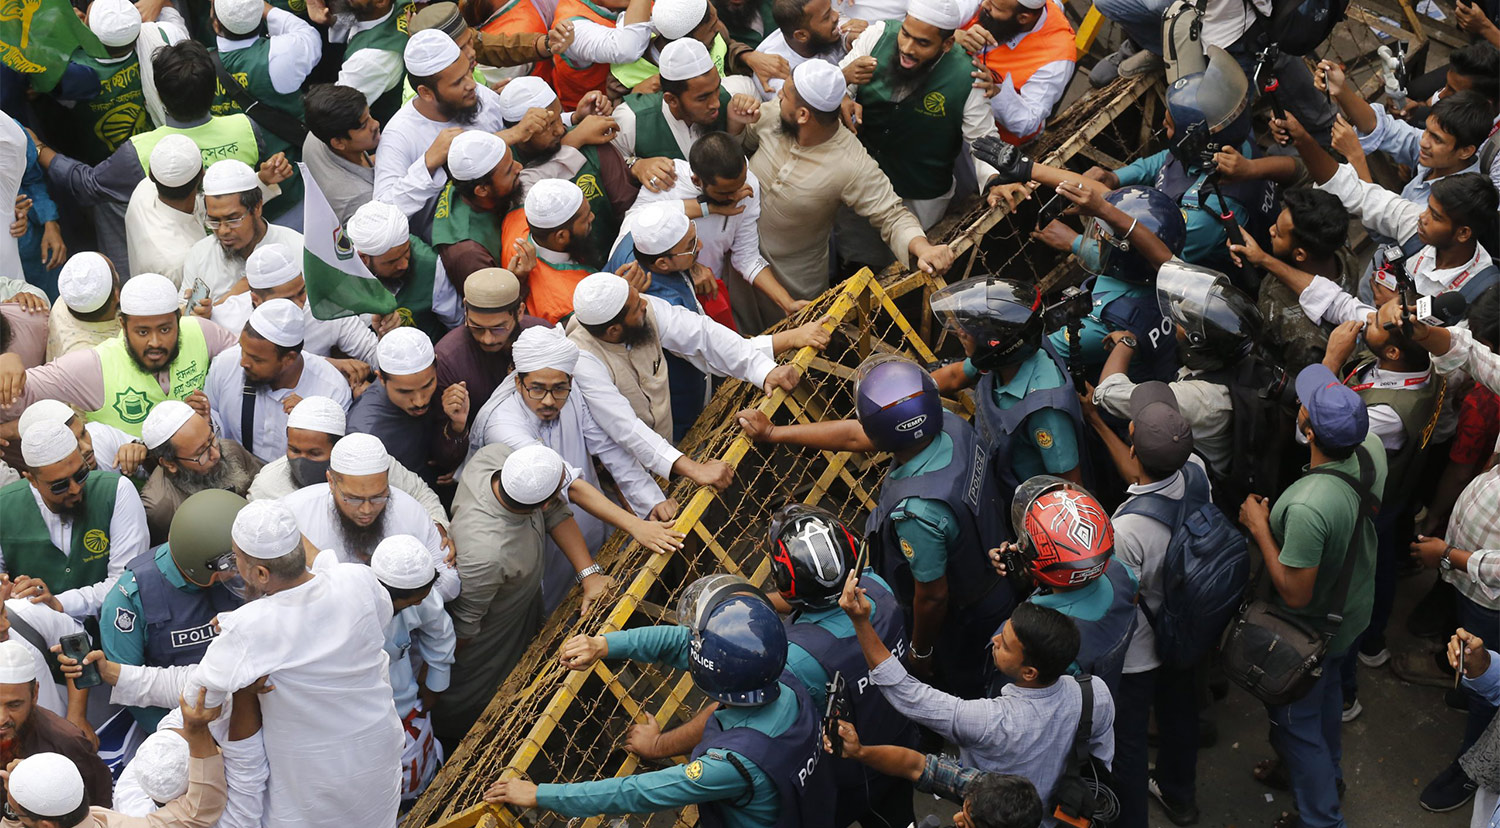 Bangladesh is at a tipping point. Here are the scenarios for a contentious election season.